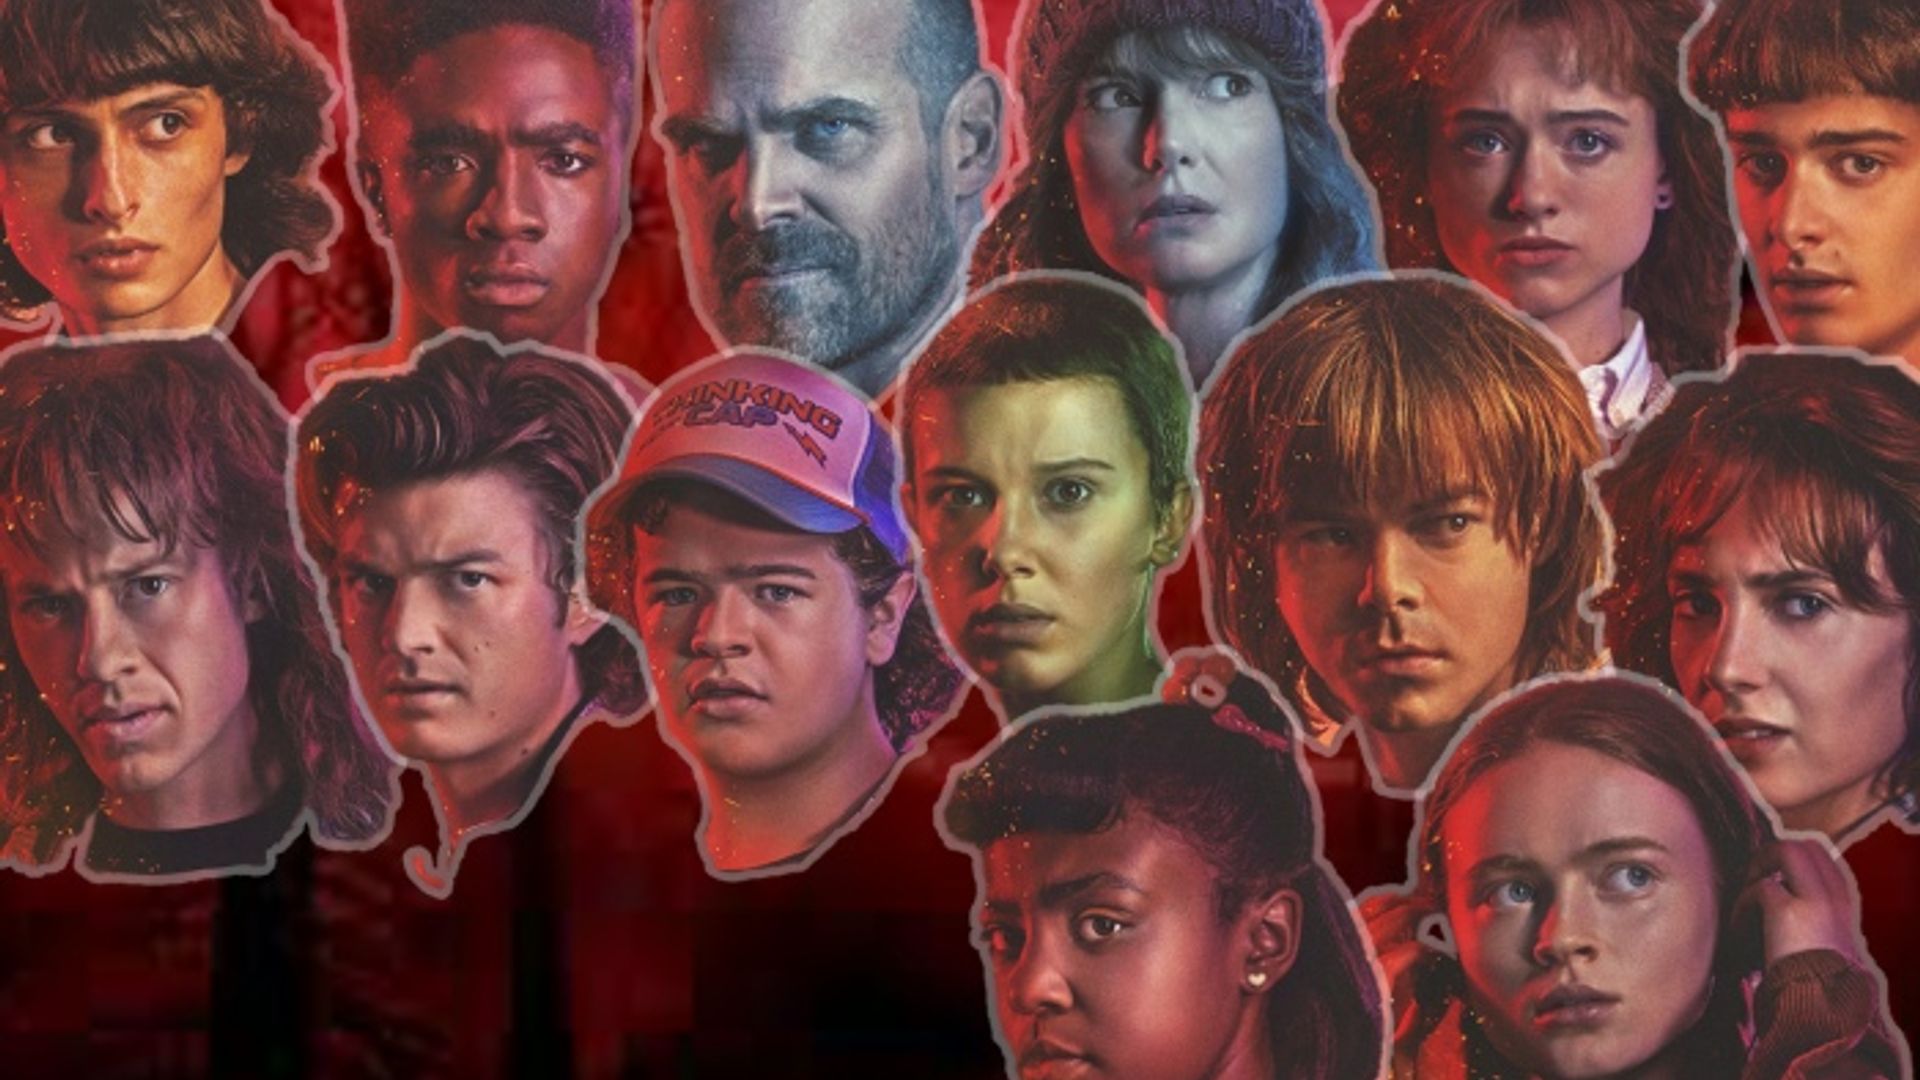 Stranger Things 5 release date, plot, where to watch, cast and